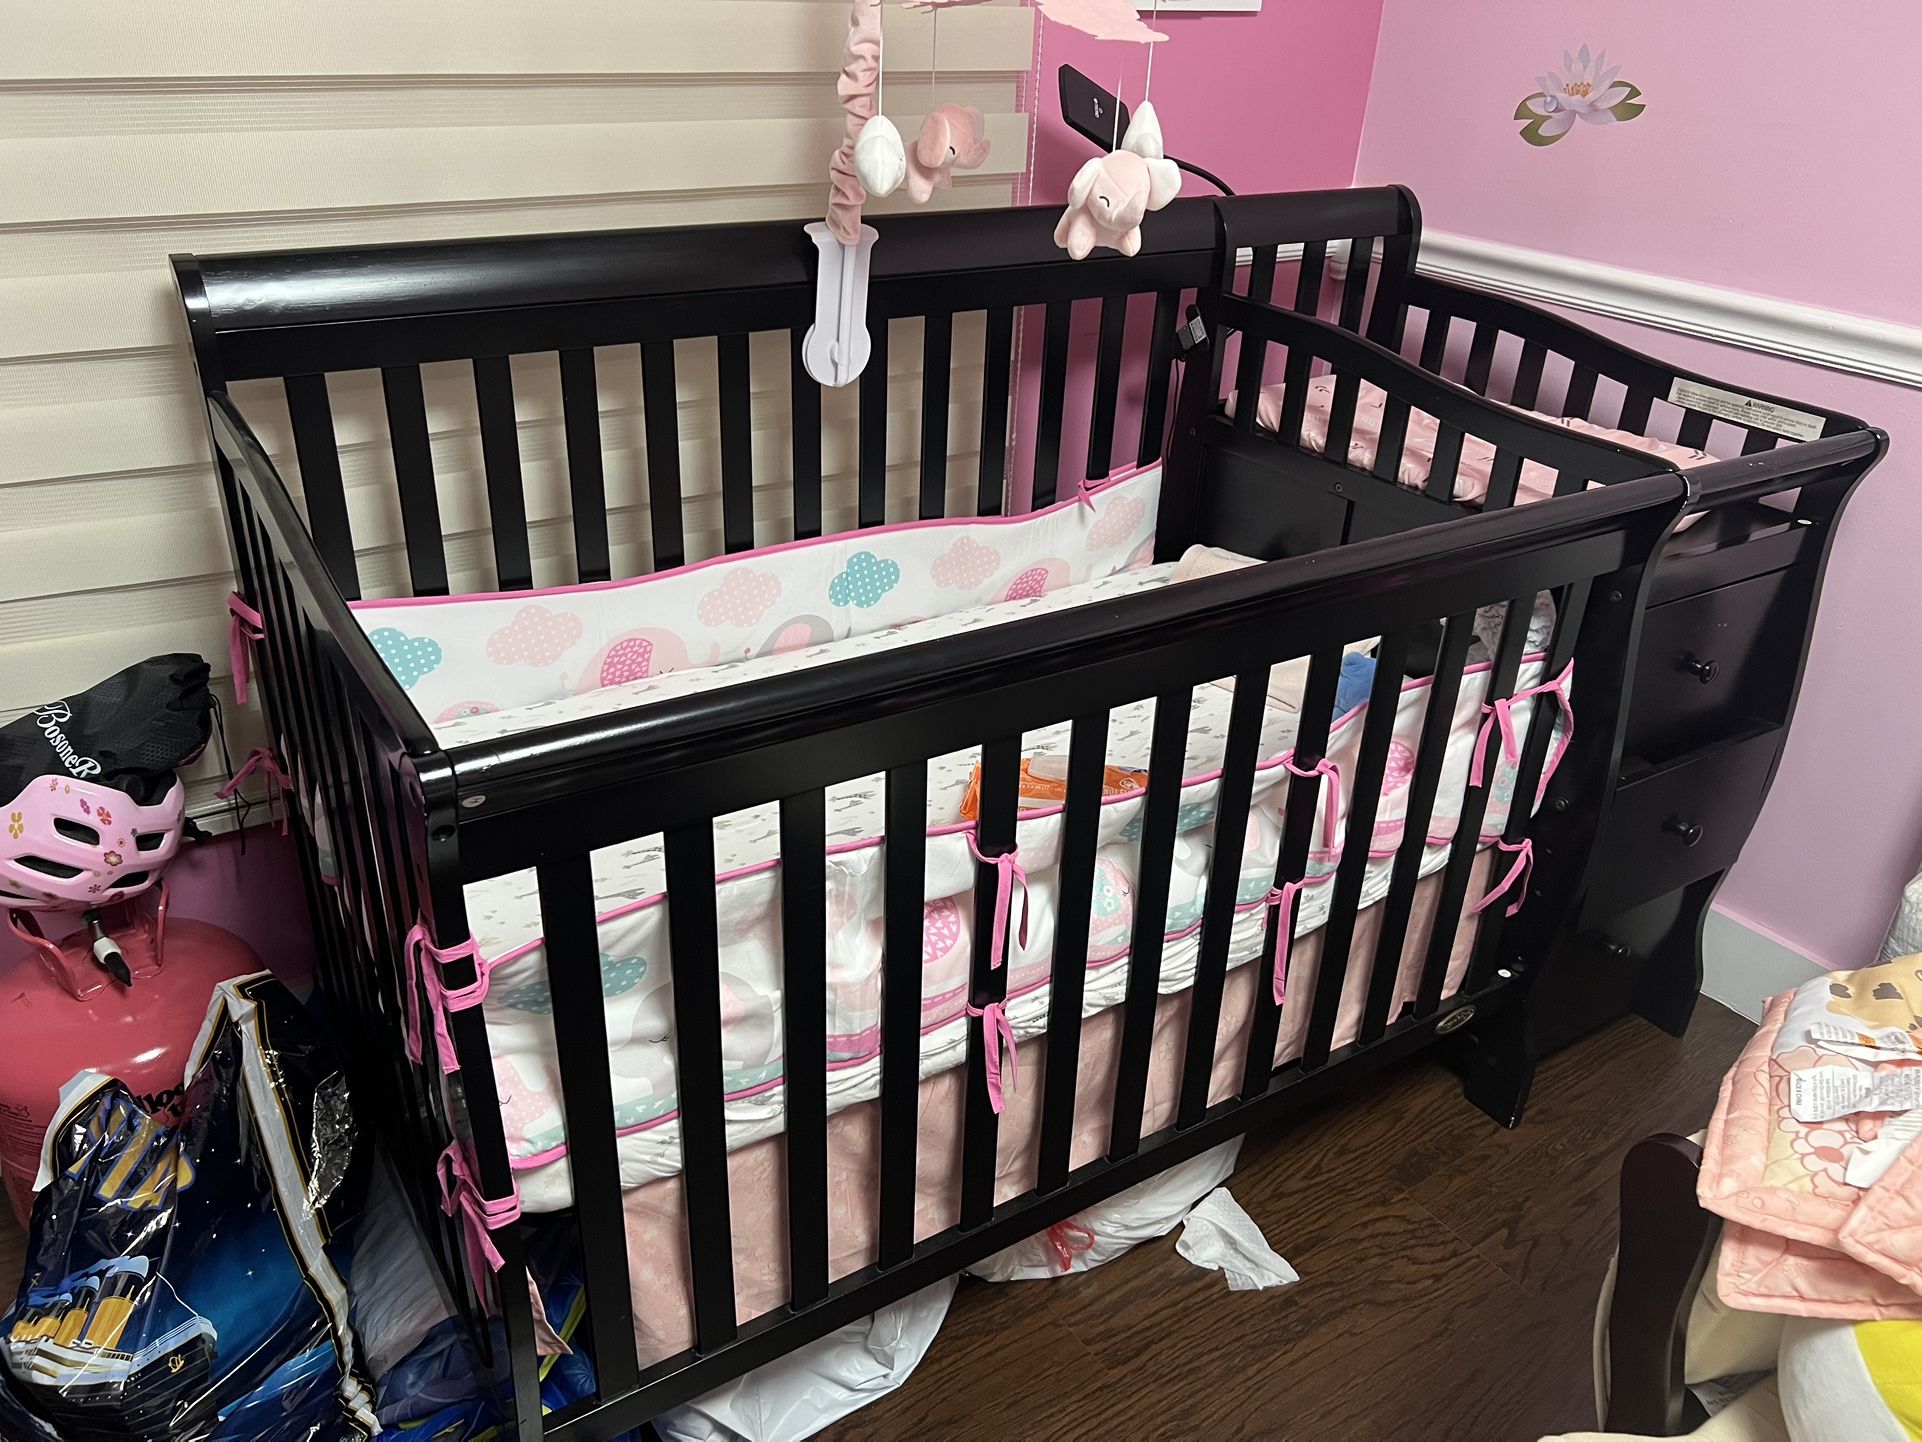 Dream on Me Crib with Changing Table